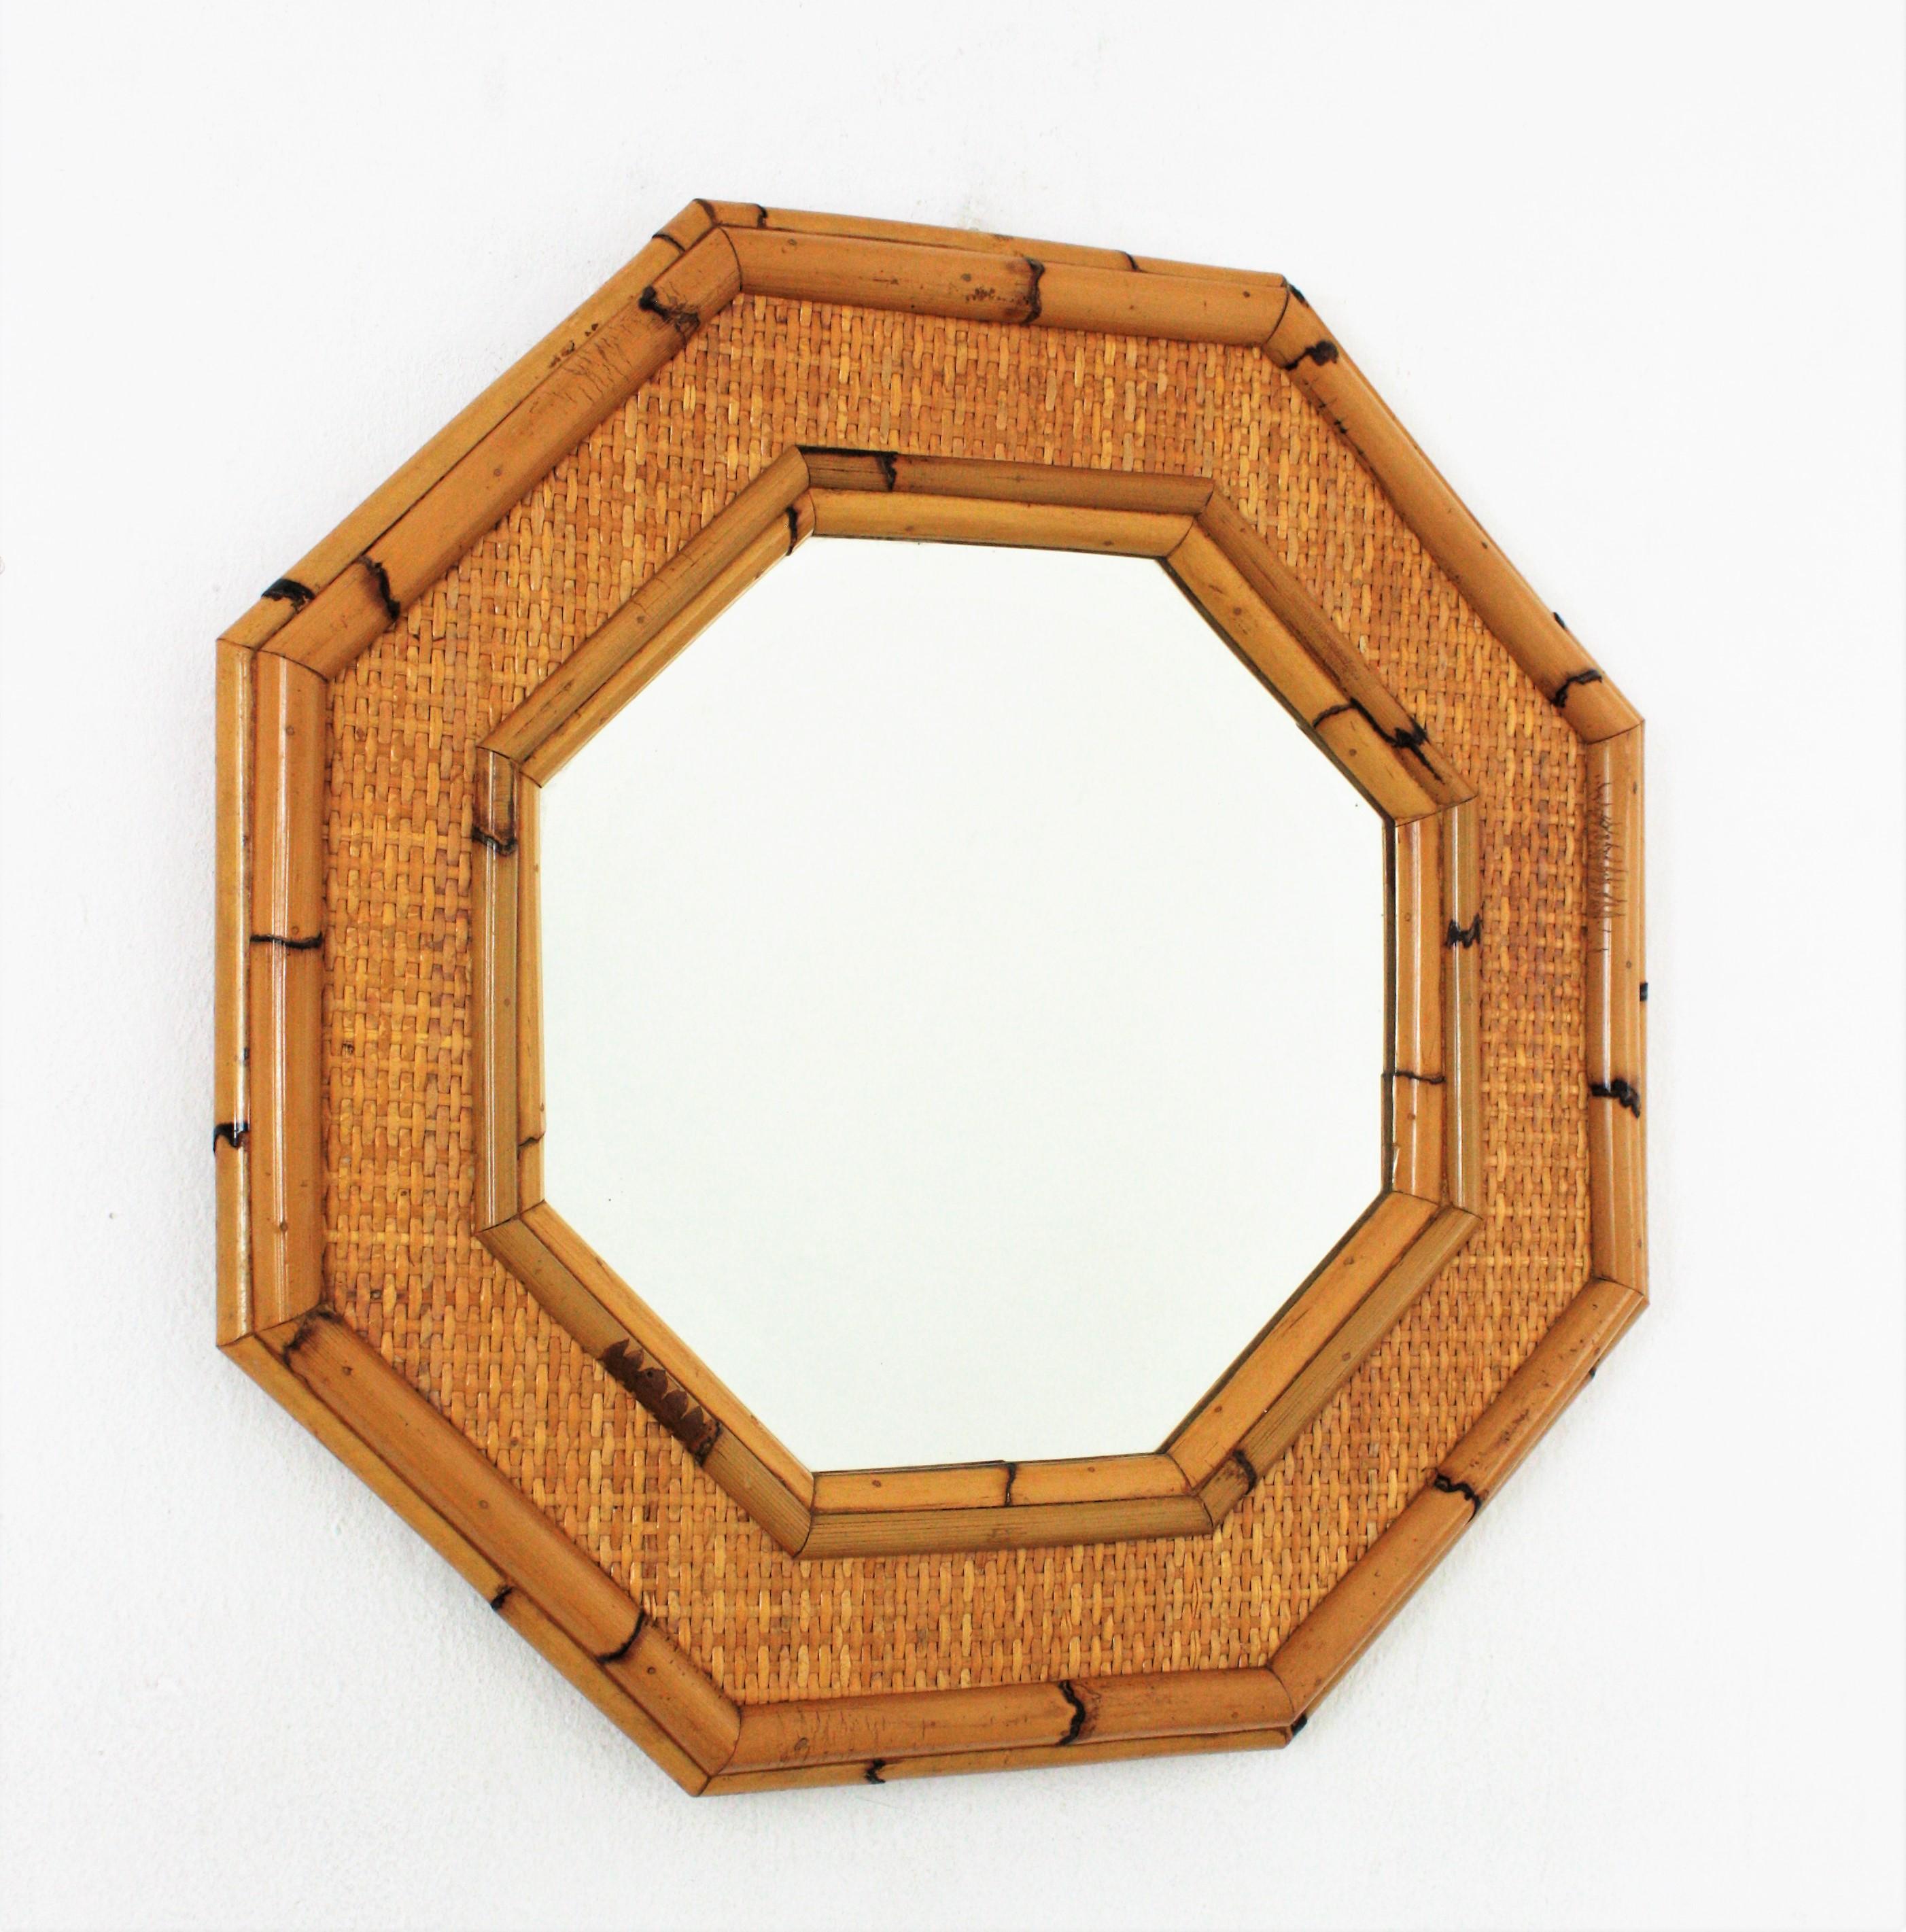 Octagonal mirror with thick bamboo frame and woven wicker, Italy, 1960-1970.
Elegant mid-20th century woven rattan and bamboo wall mirror in octagon shape. It has reminiscences of the designs by Gabriella Crespi and Christian Dior Home